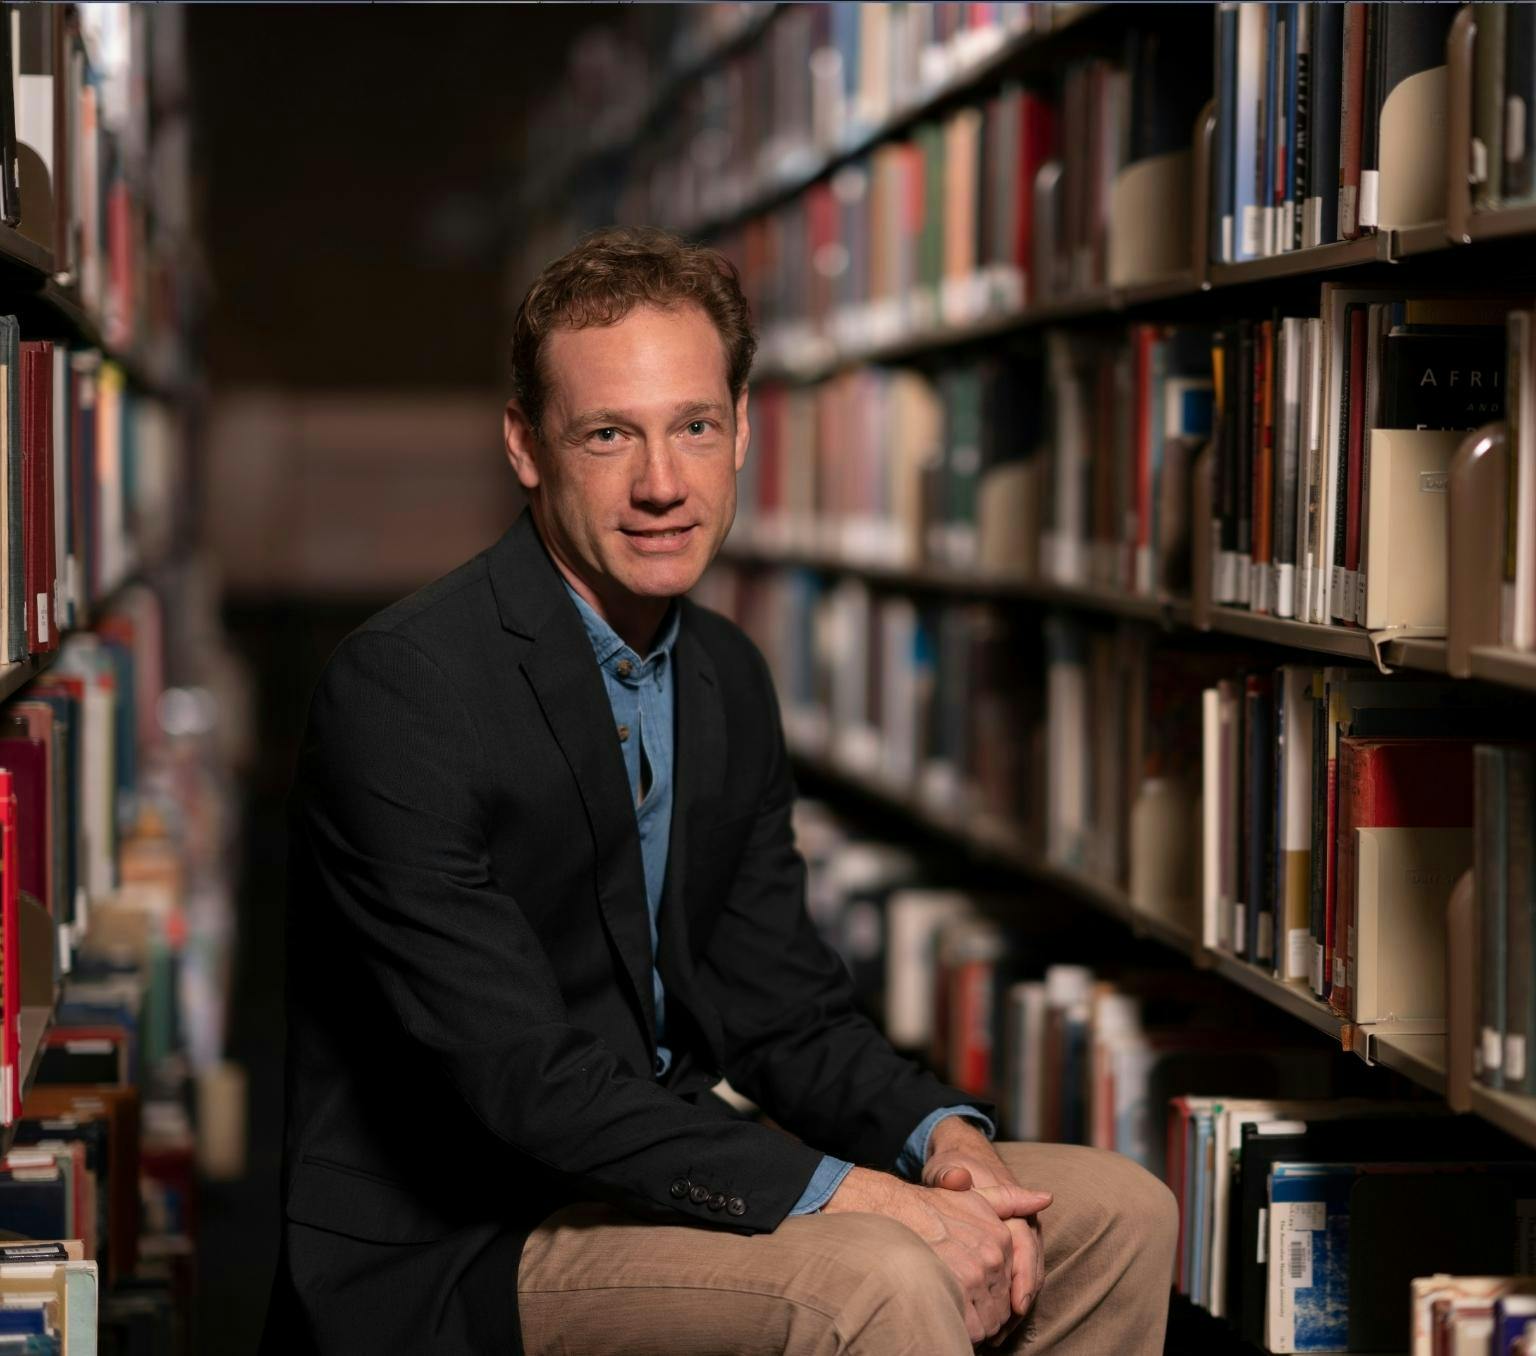 Timo is sitting in an aisle of a libary surrounded by books. He is looking at the camera with a netral expression and wearing a black suit jacket, beige pants and blue collared shirt.